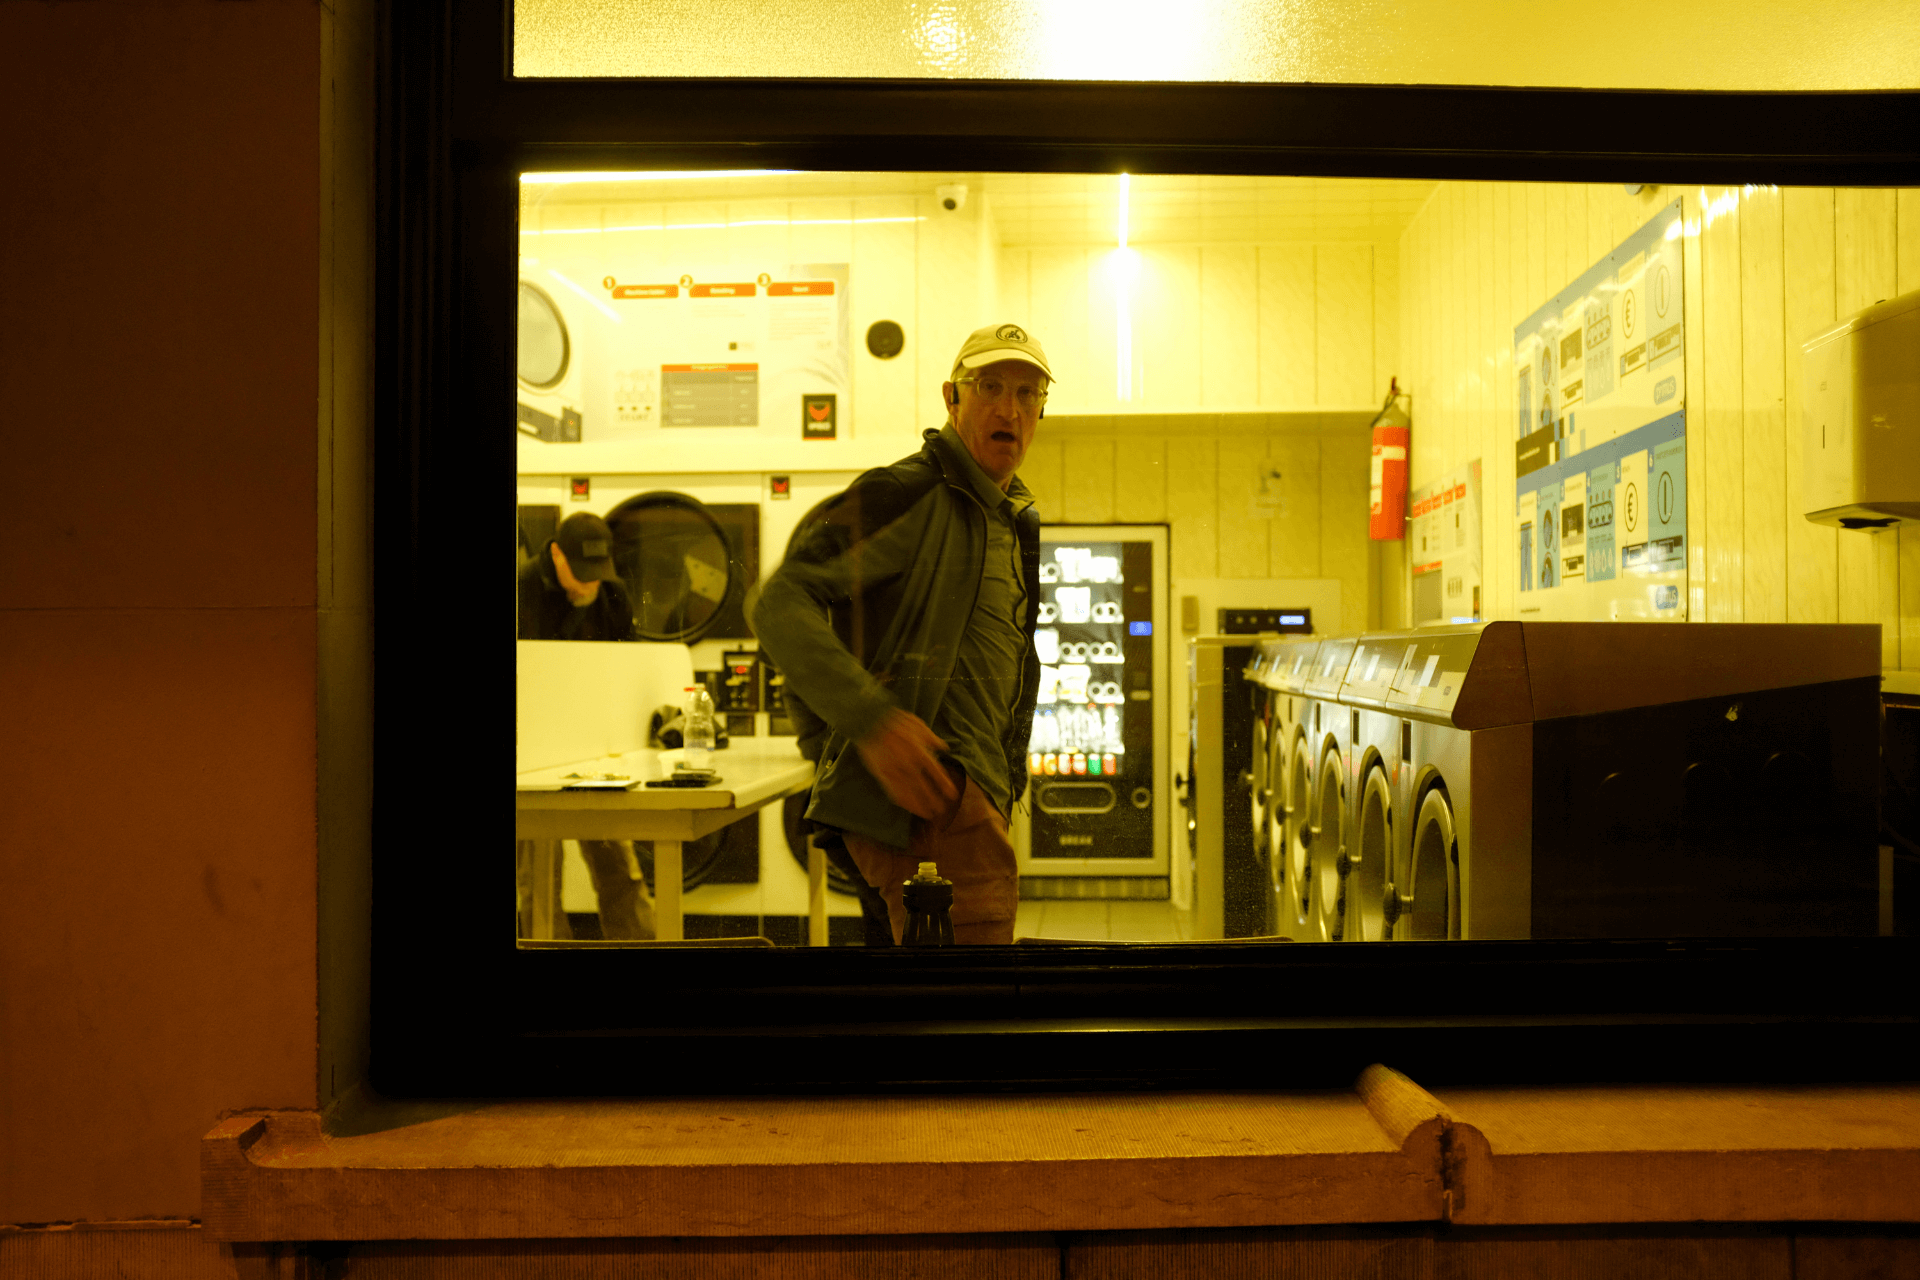 A man with a white cap and casual spring jackets stands in a laundromat, hands in pockets. He is facing out through a window and looking directly at the camera